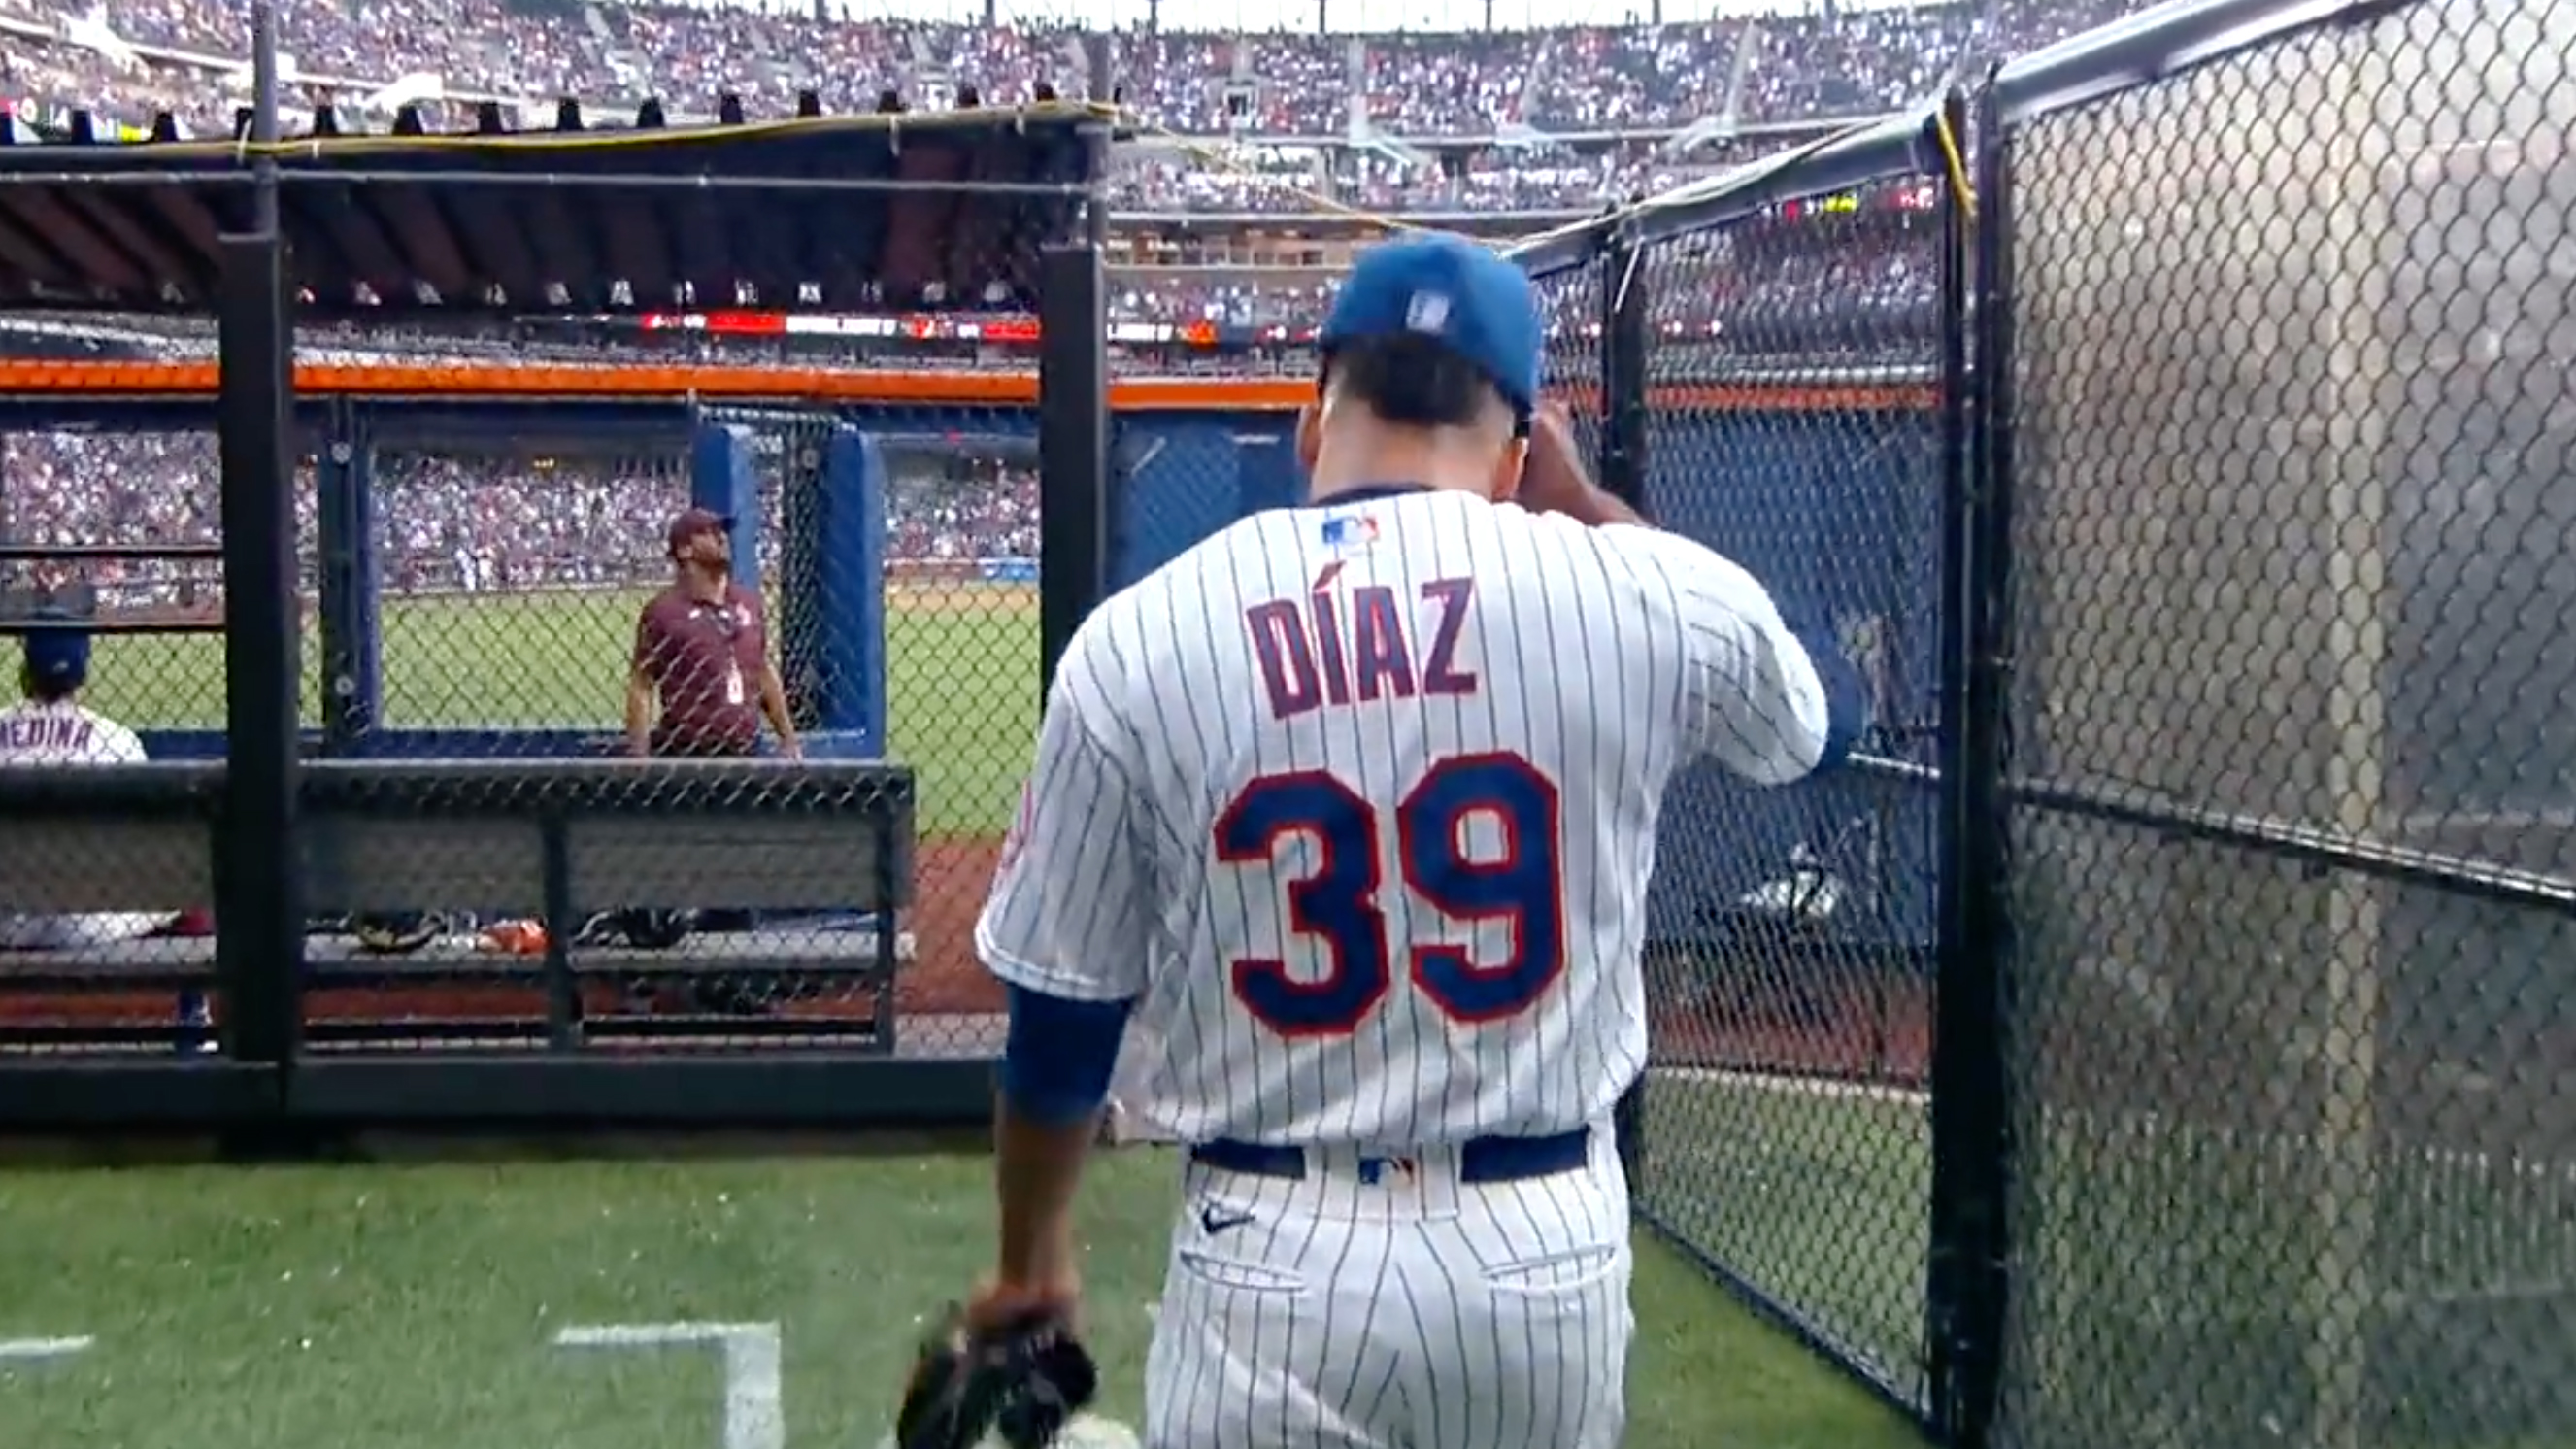 Video of Mets closer Edwin Diaz entrance goes viral - Sports